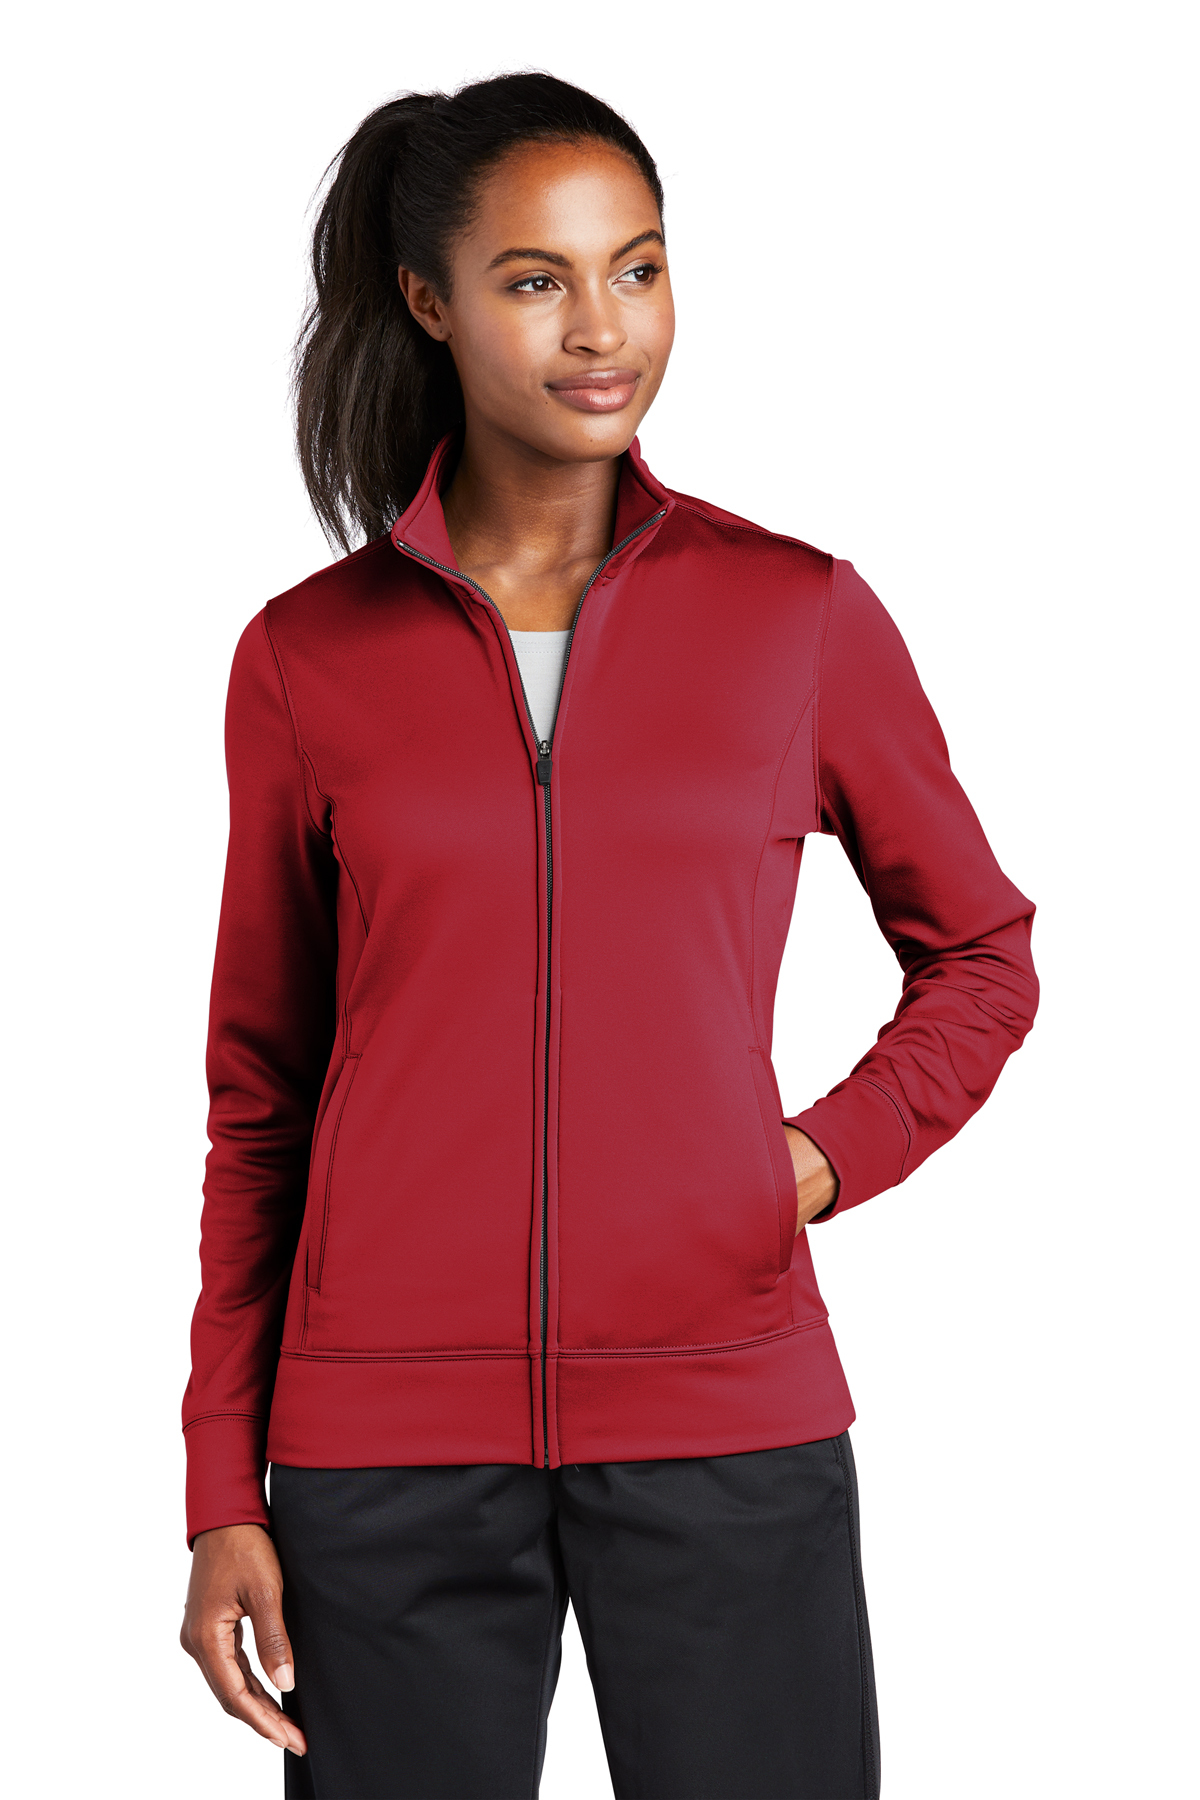 Red Women's L Large Details about   LEKI Nordic Cross Country Ski Jacket Polyester Exc Cond!